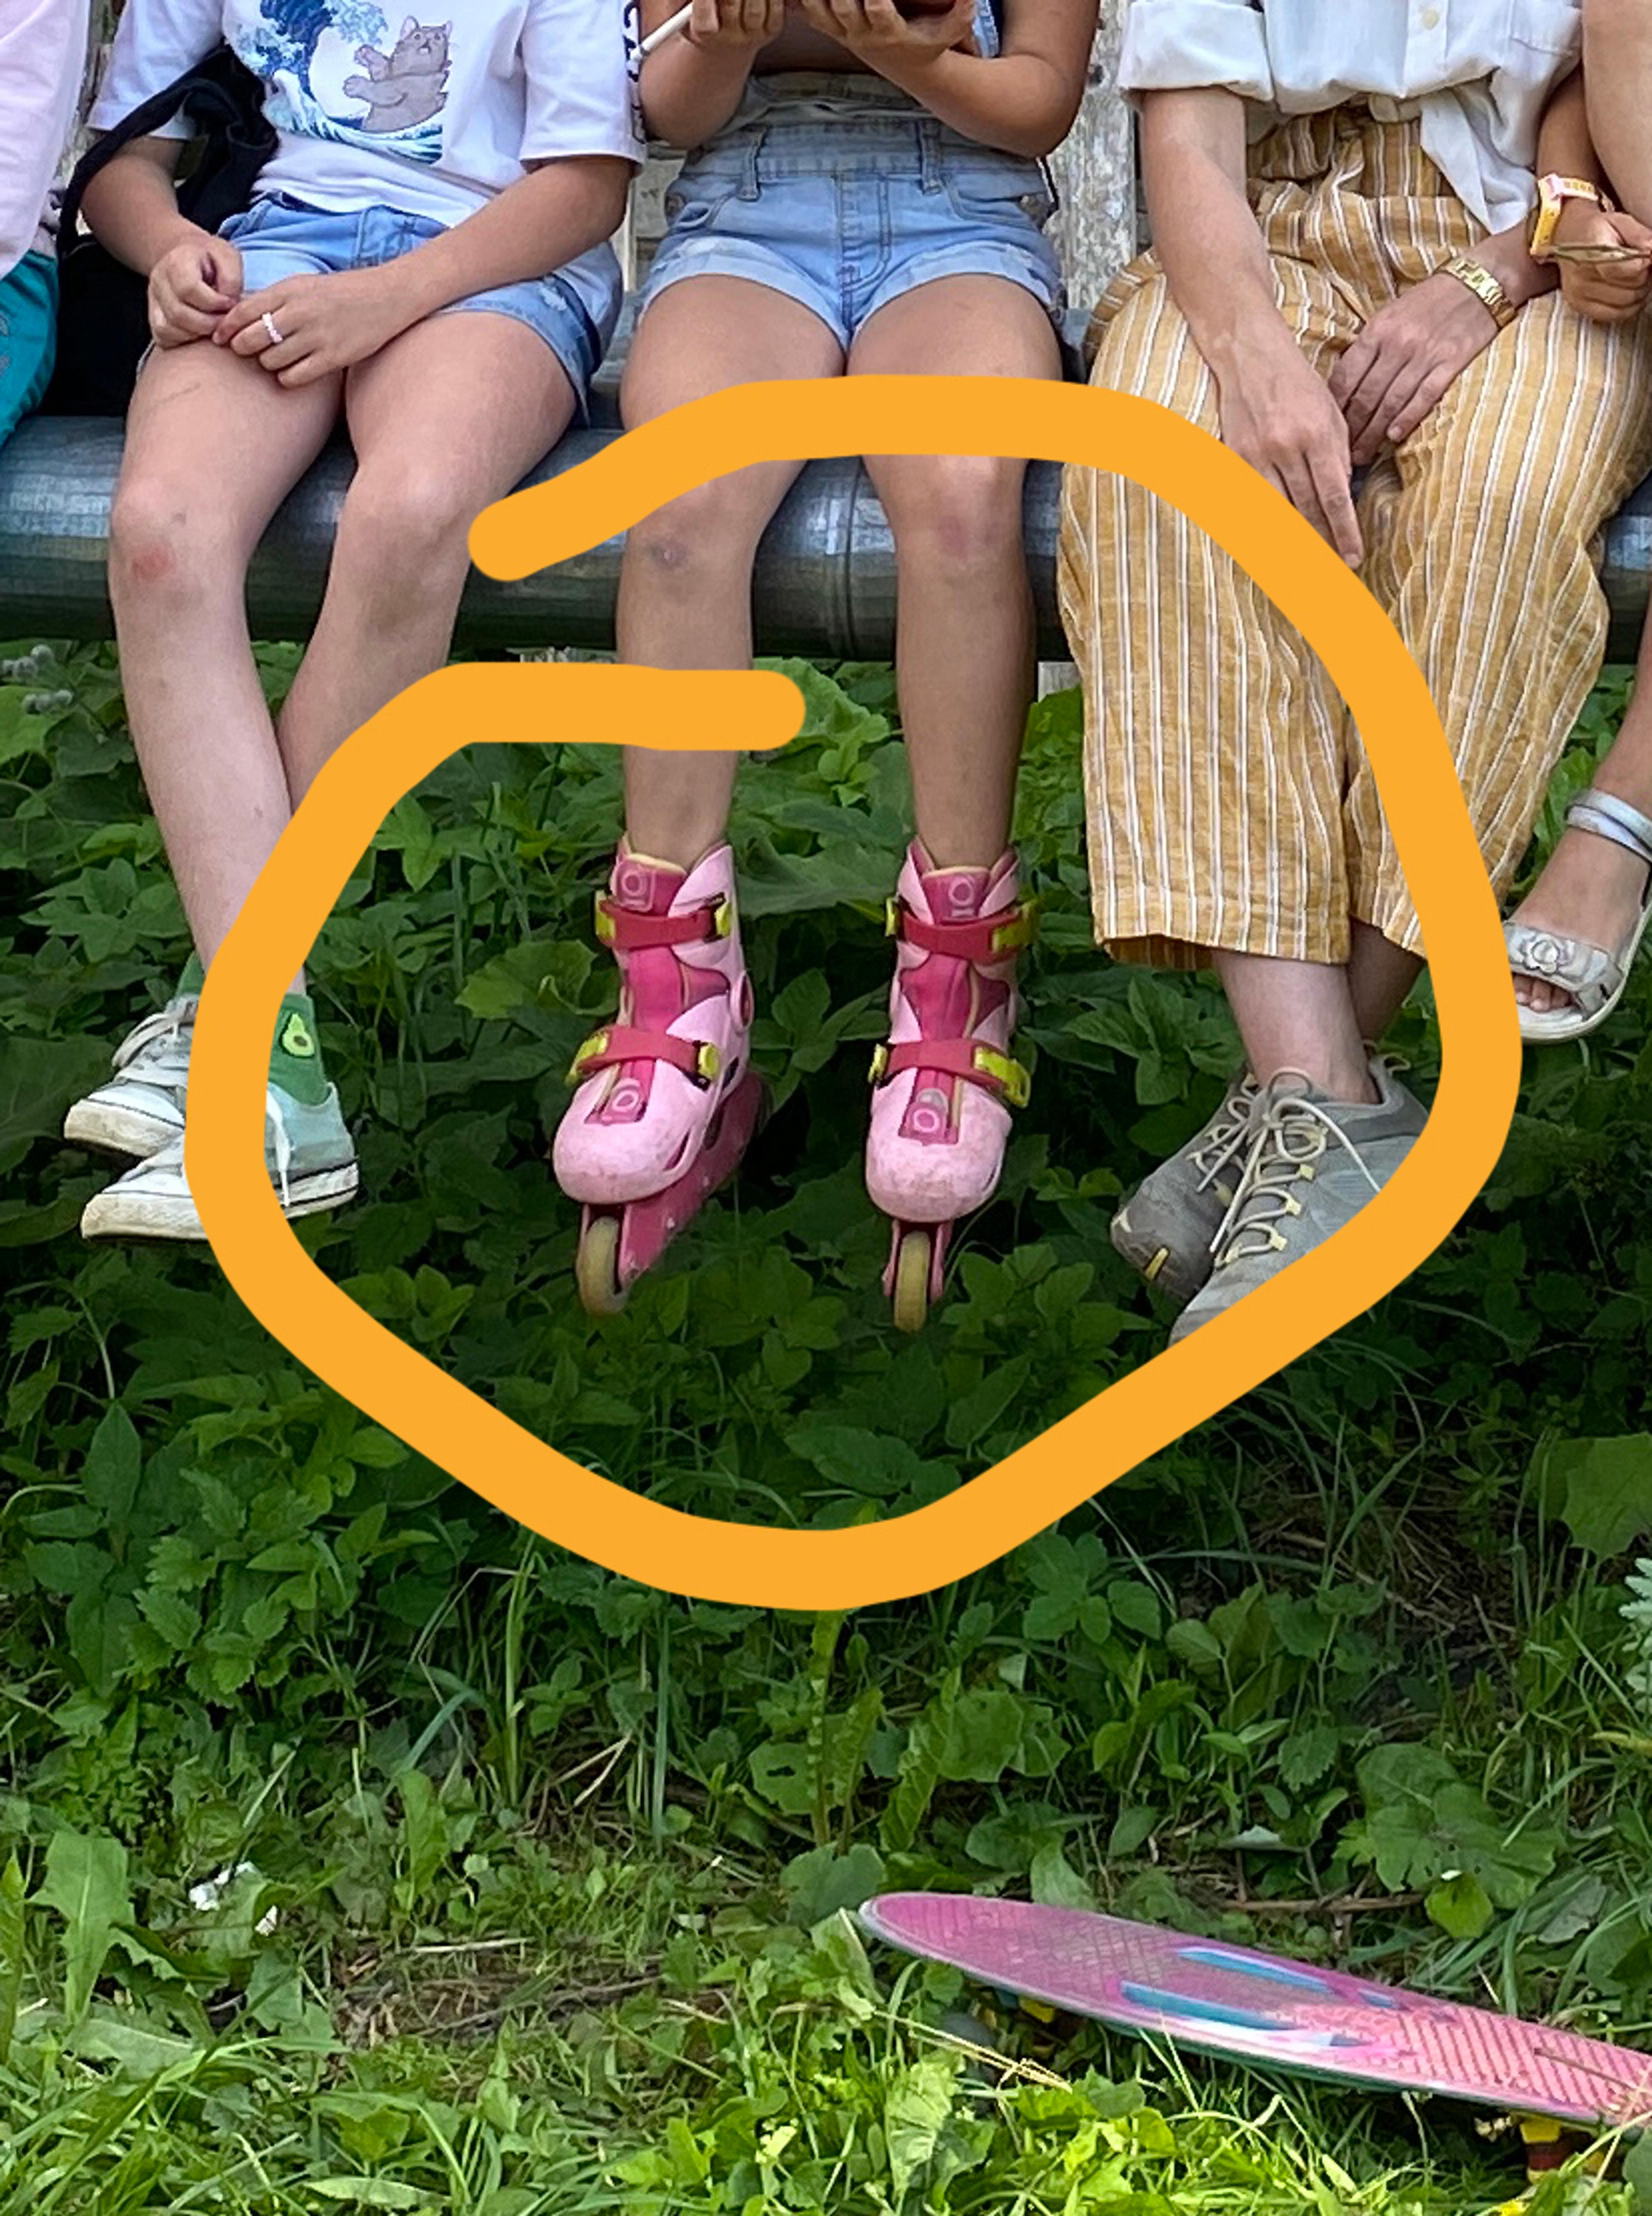 detail of group portrait photo, rollerskates circled. 